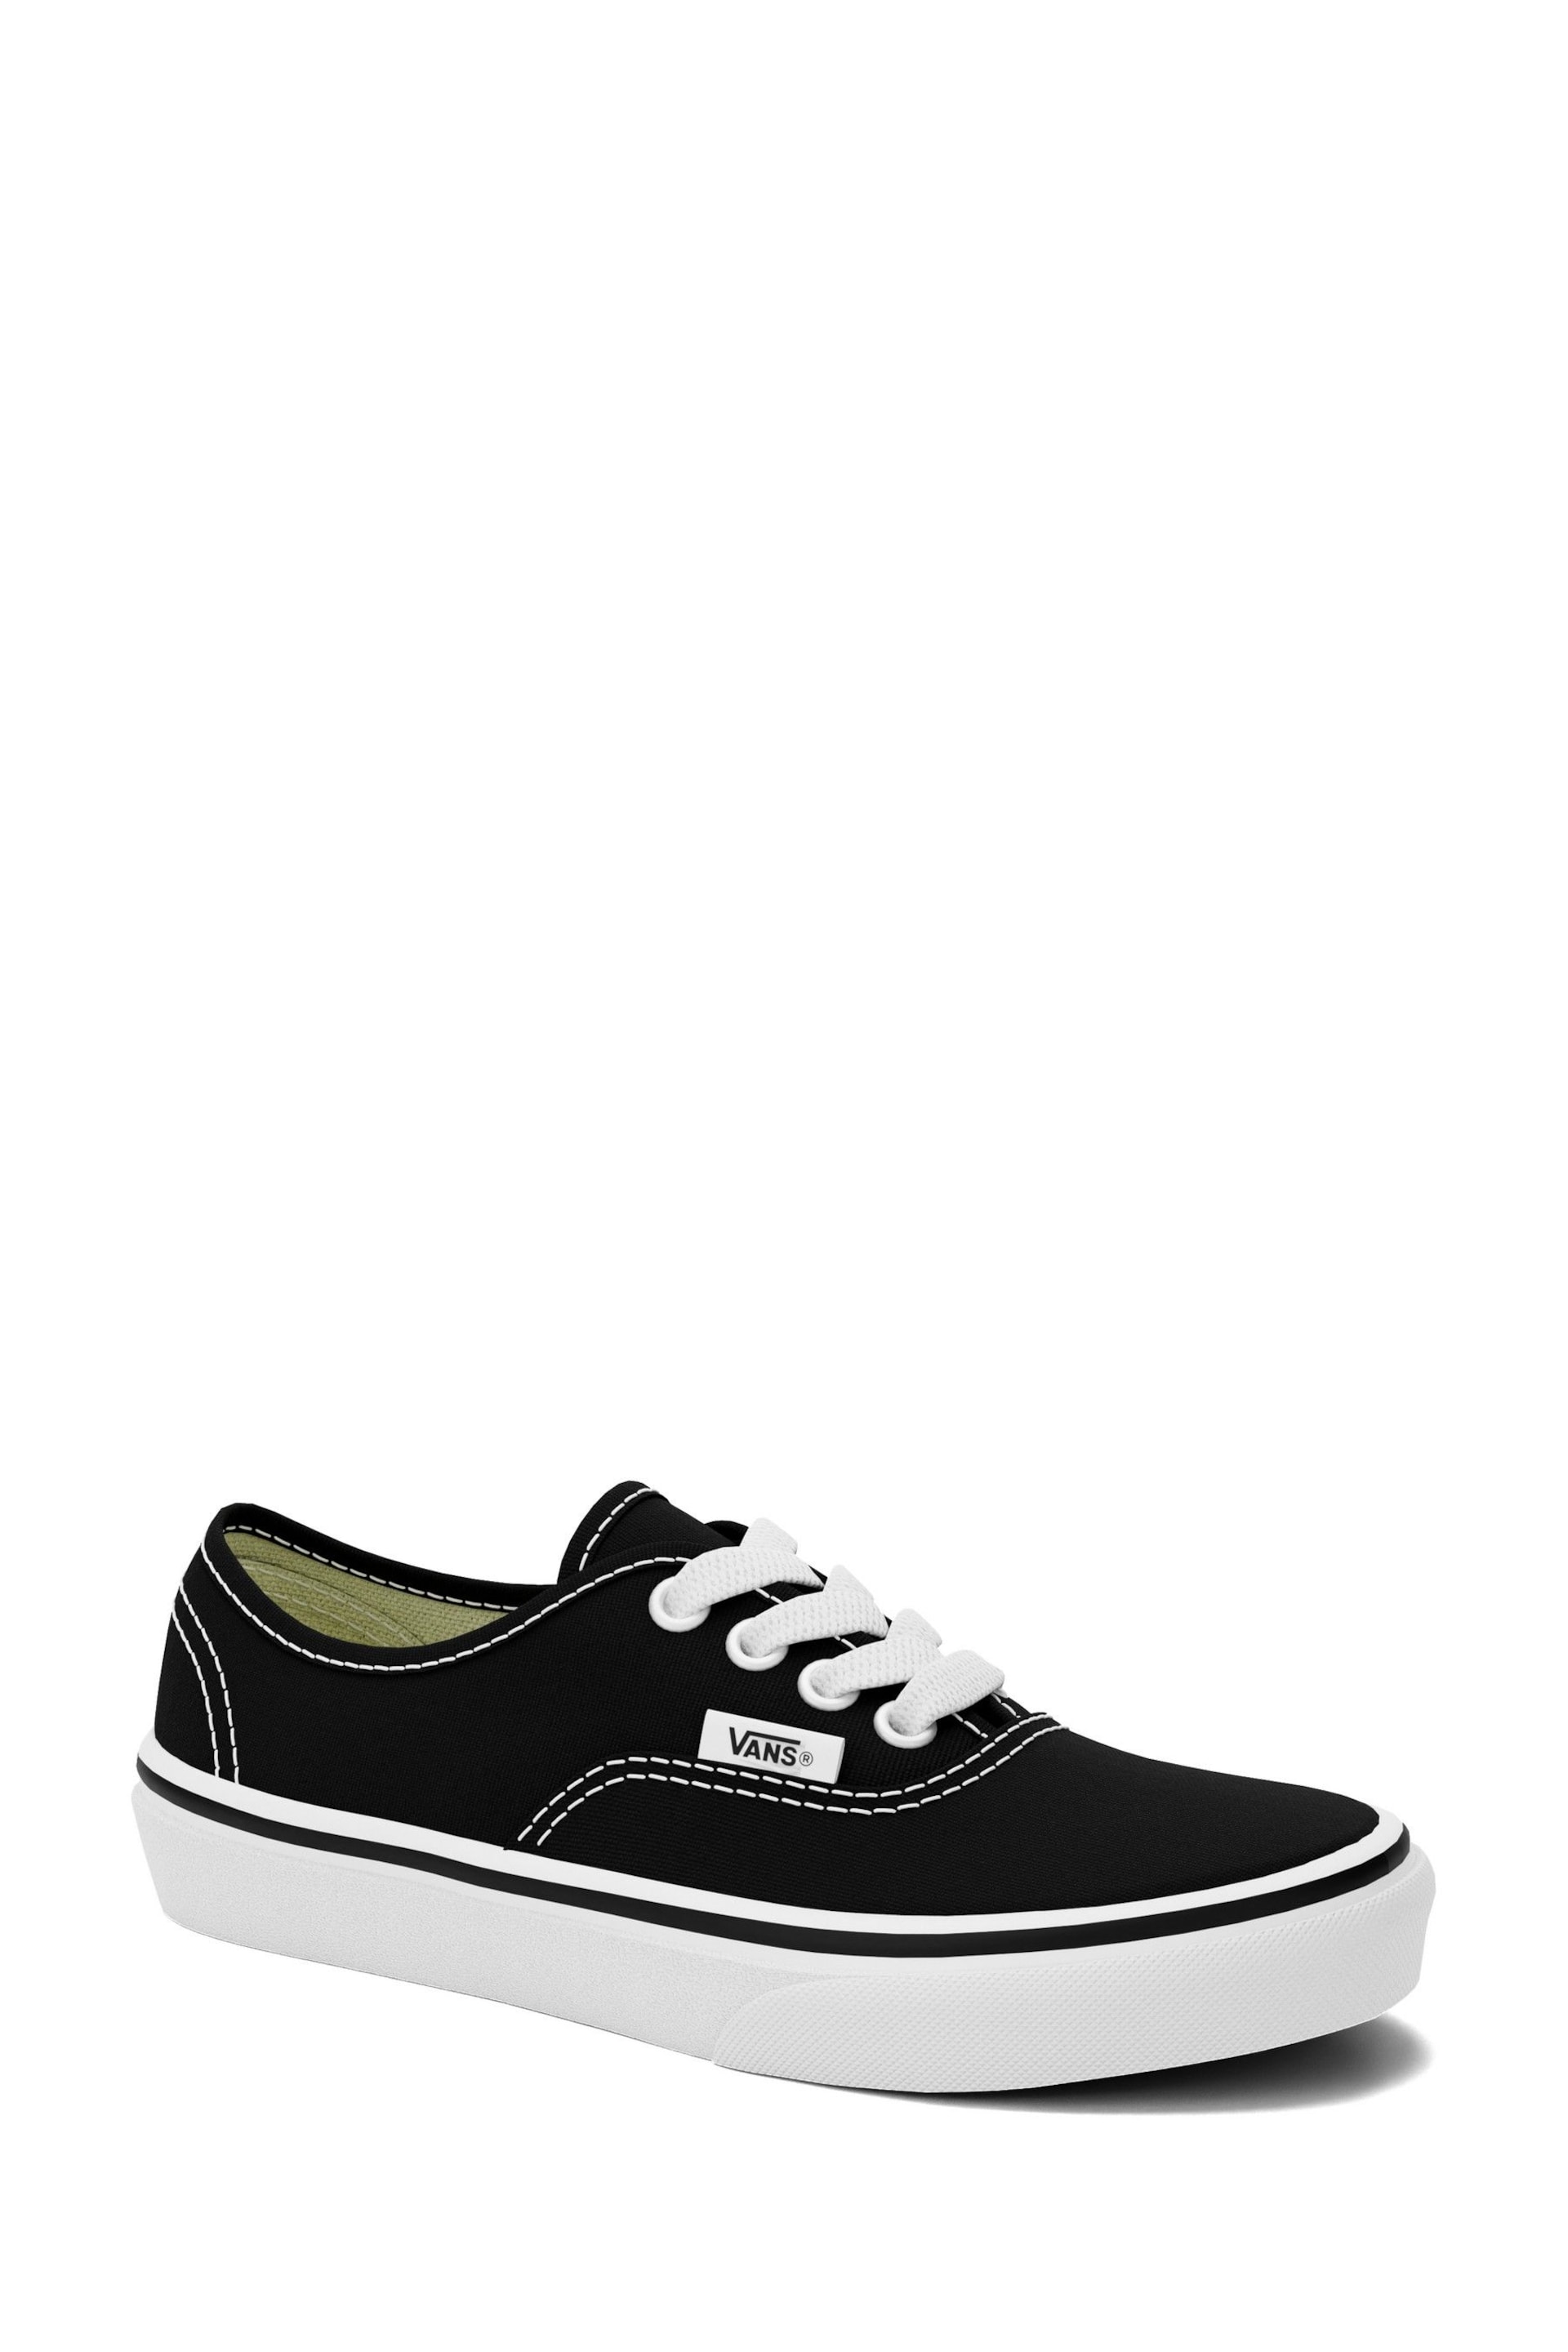 Vans Boys Authentic Trainers - Image 3 of 7